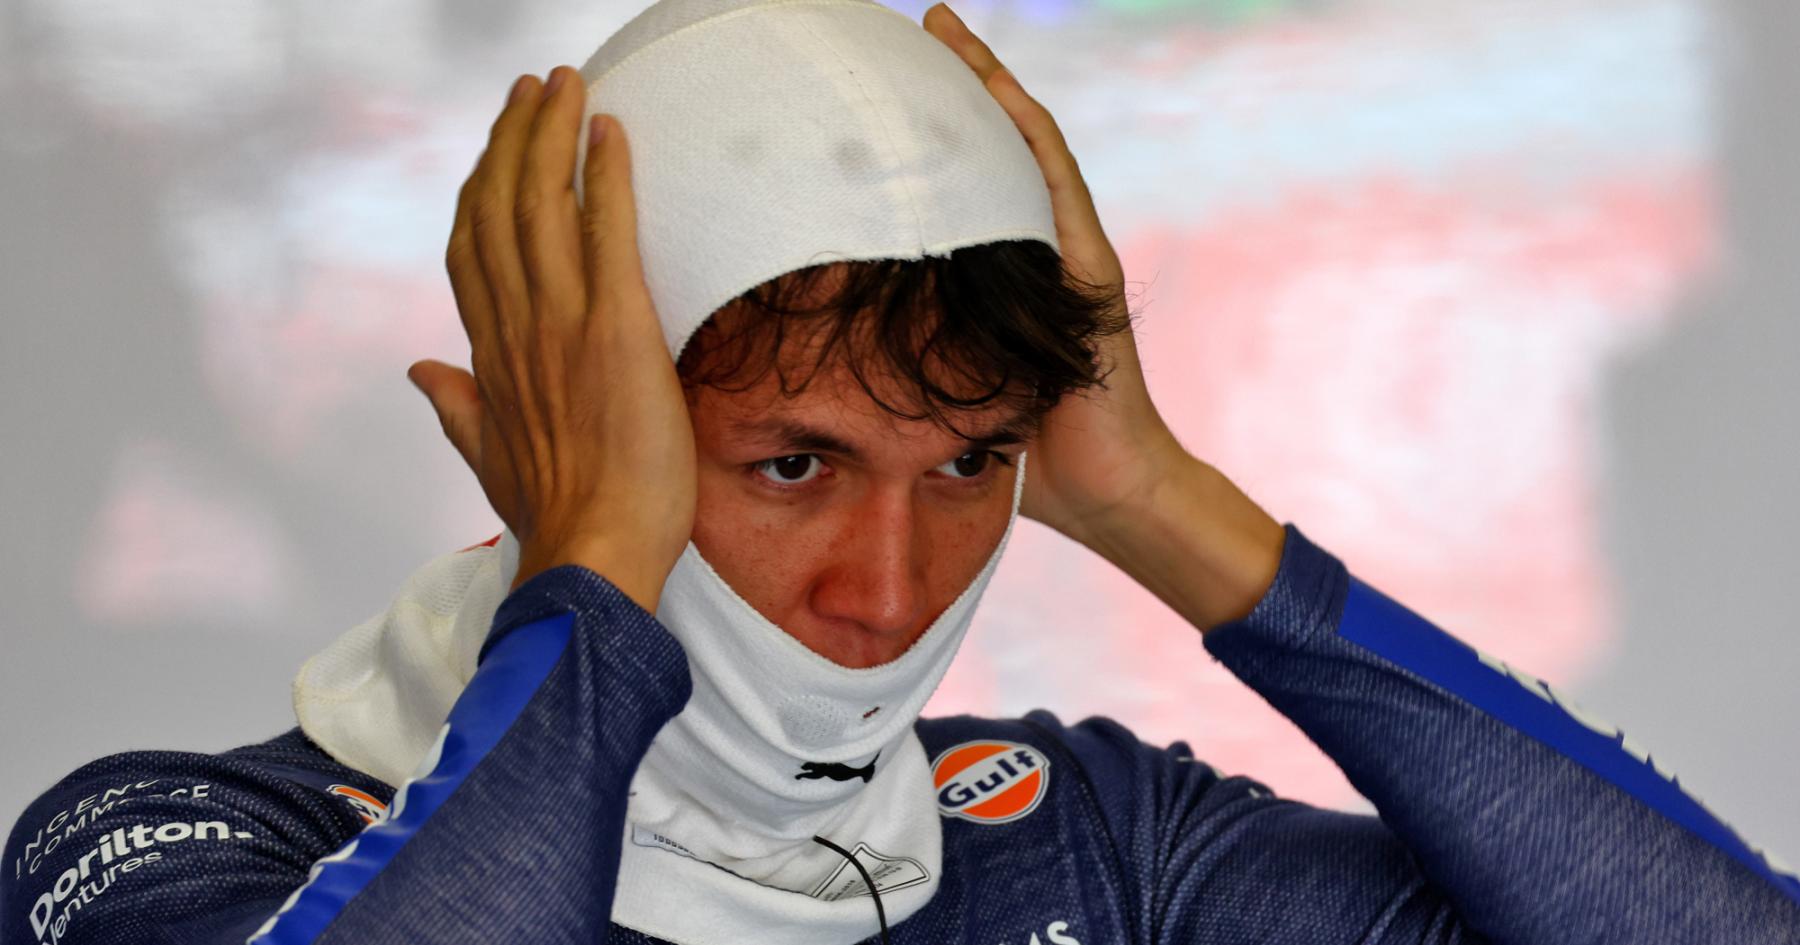 Albon's Resurgent Drive: A Definitive Analysis of His Return to Williams F1